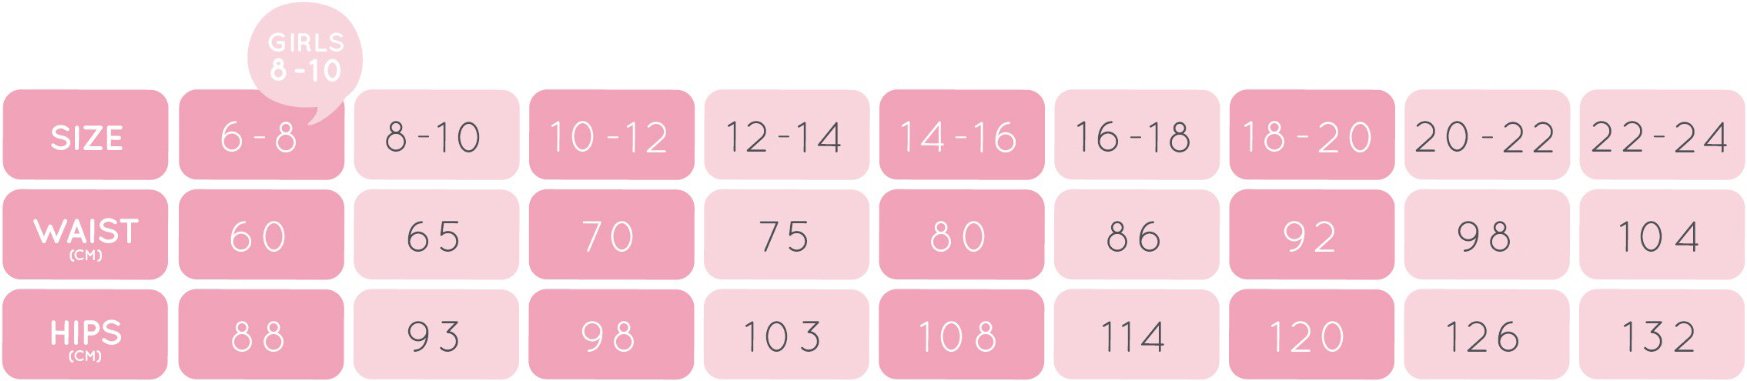 Love Luna Period Panties Size Chart | The Period Co.